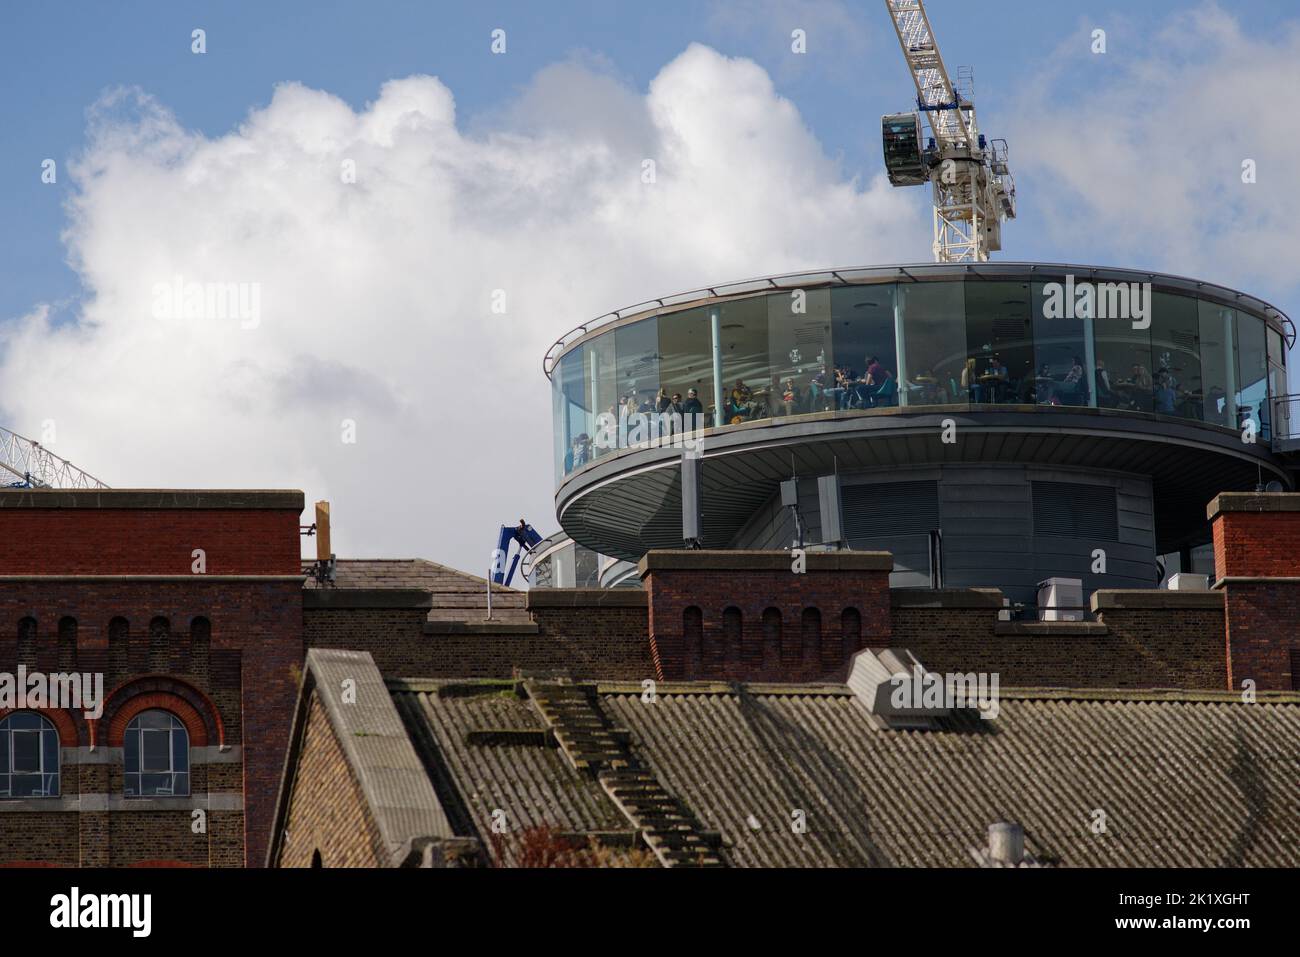 The Guinness brewery in Dublin, Ireland. A famous destination open 7 days a week. A distinctive black ale made in the Irish republic. Stock Photo